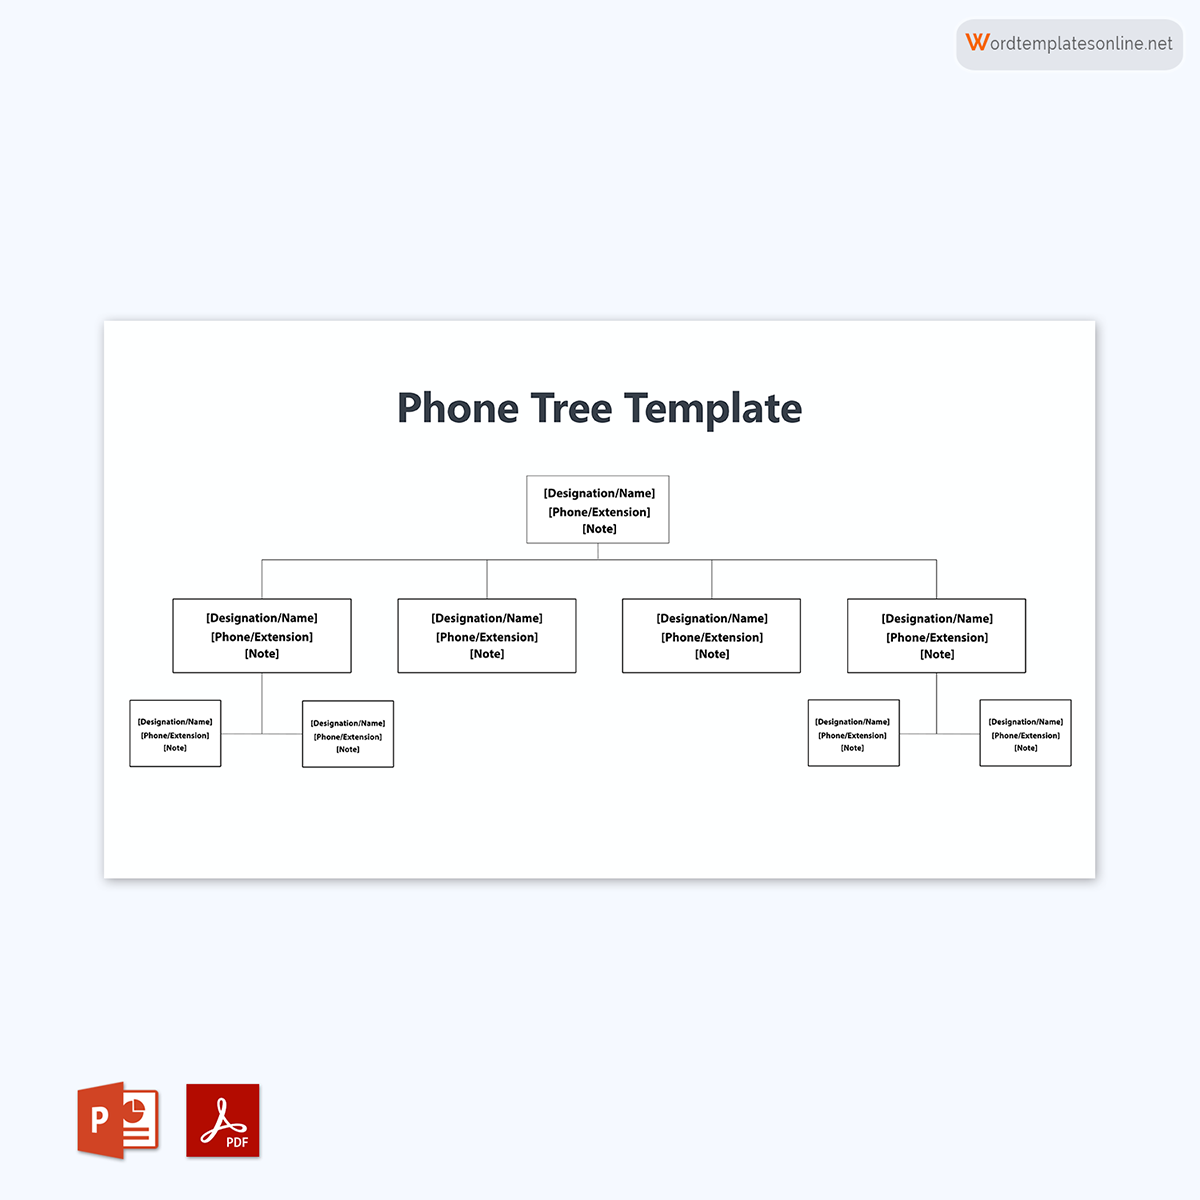 
phone tree template excel
